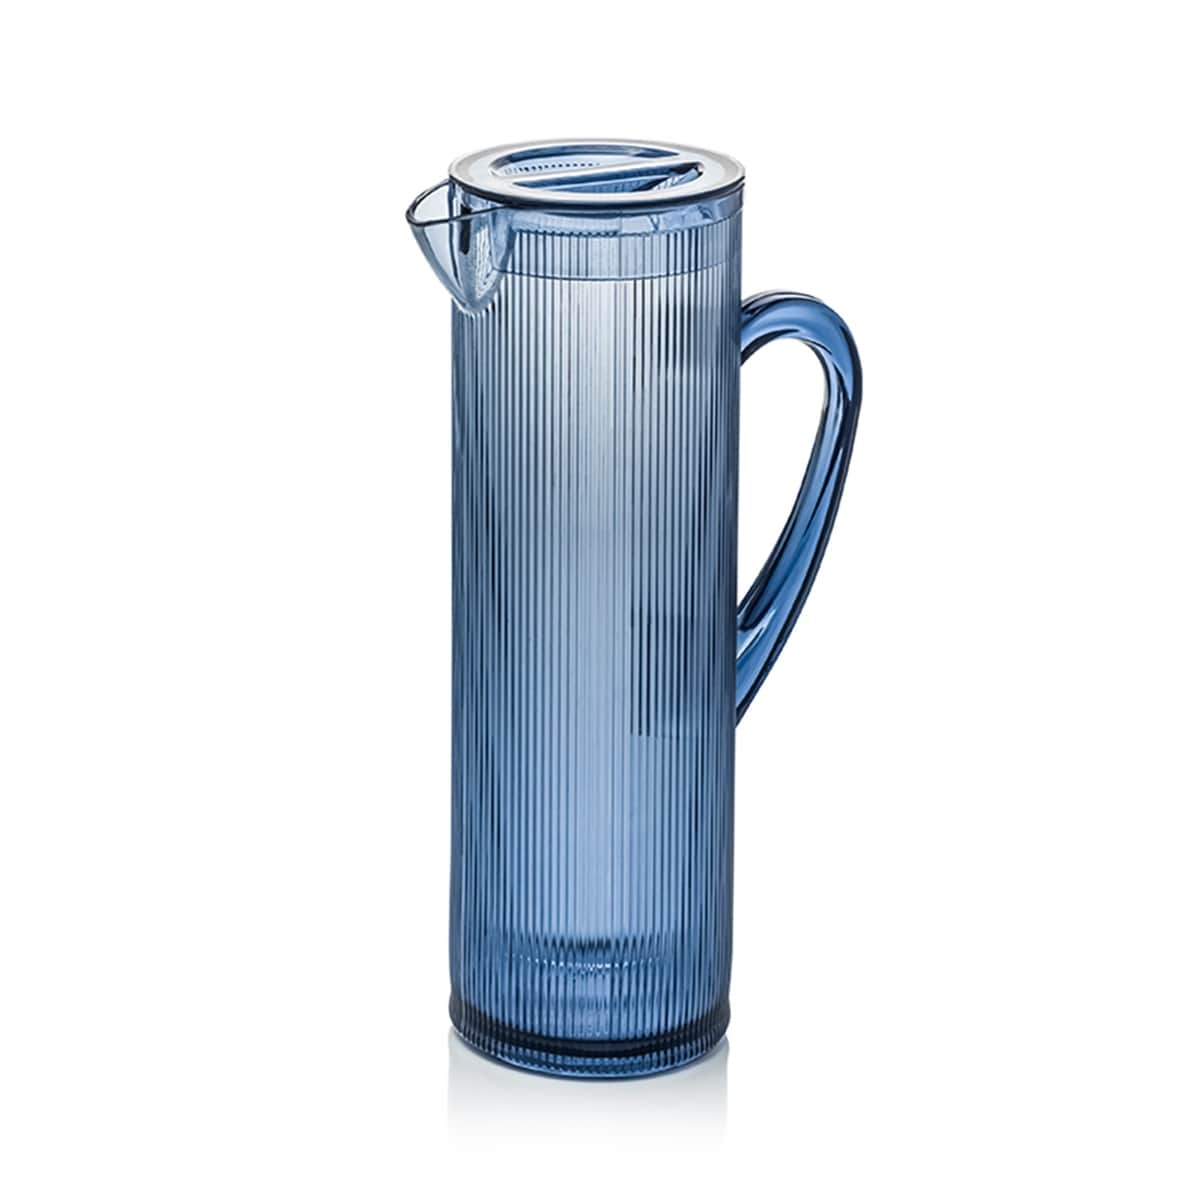 https://ak1.ostkcdn.com/images/products/is/images/direct/32379a23f5ce13d9c2d9e0ca7c501227cbafa08f/Elle-Decor-Acrylic-Water-Pitcher-with-Lid%2C-50-Ounces-Iced-Tea-Pitcher-for-Fridge%2C-Indigo-Blue-Tall-Jug.jpg